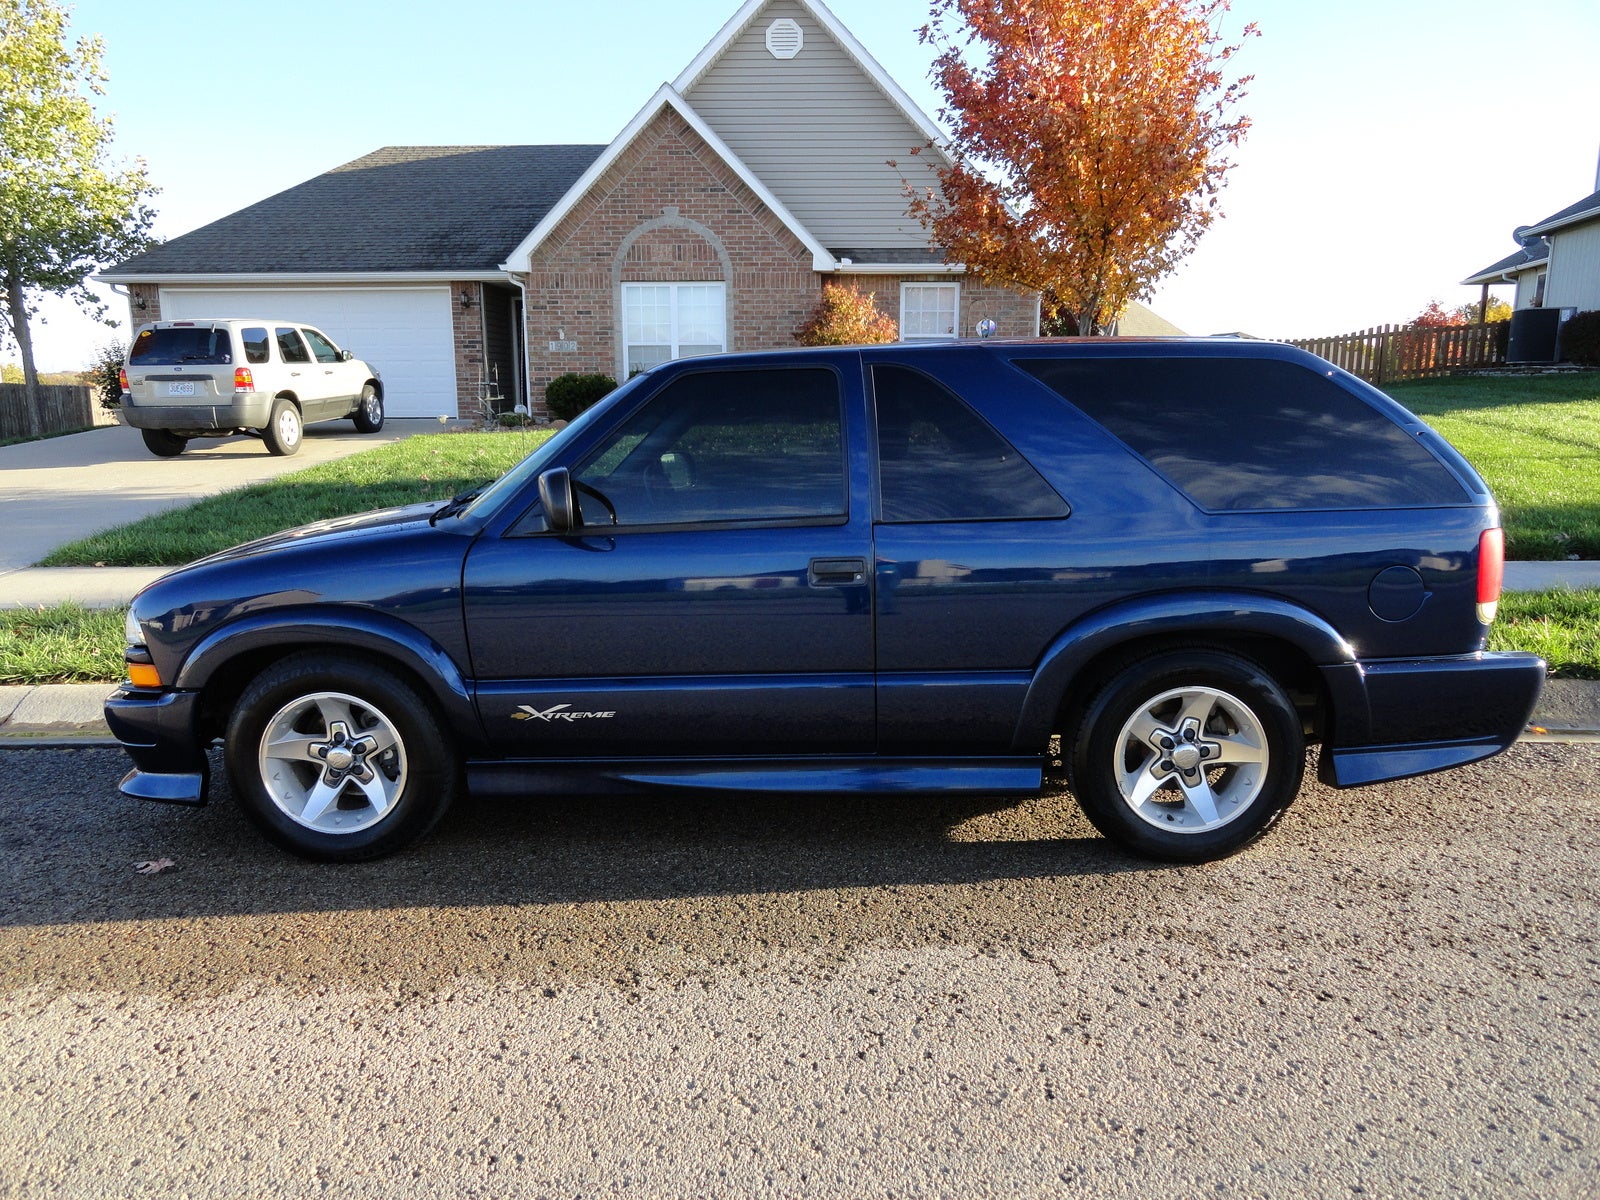 Picture Of 2004 Chevrolet Blazer 2 Dr Xtreme Suv Exterior, 1600x1200 in 111...